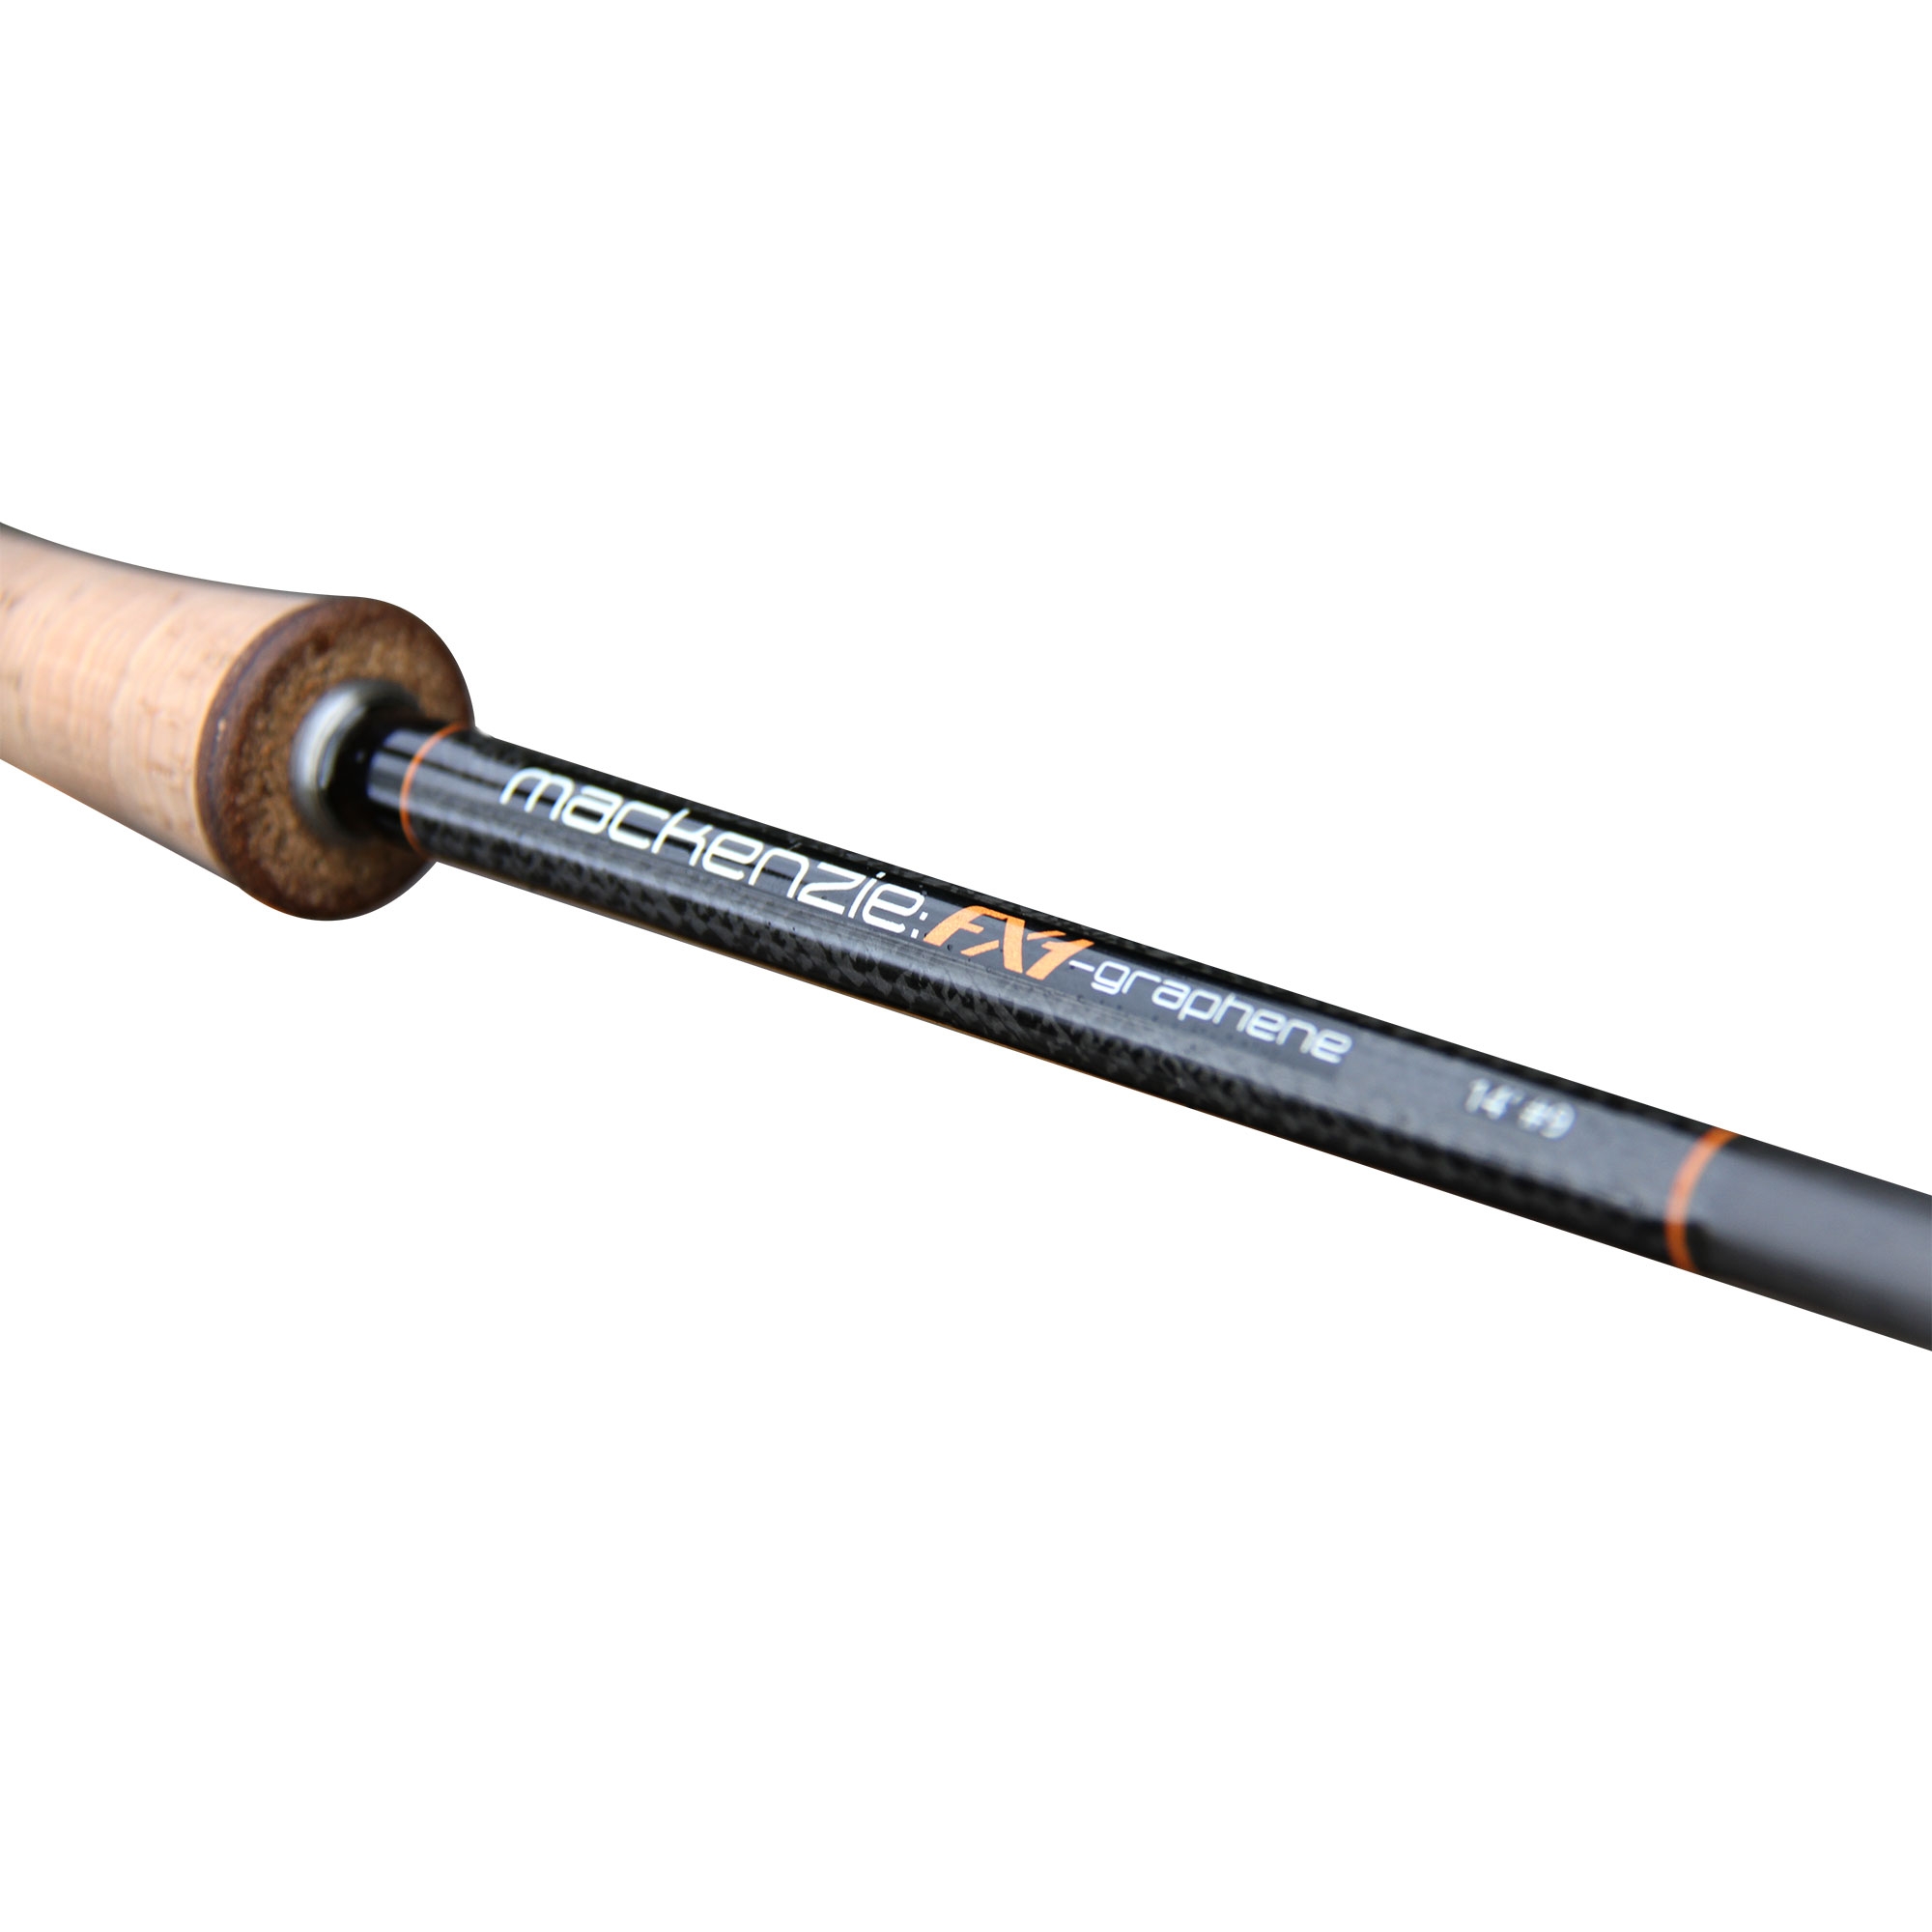 https://cdn.anglingactive.co.uk/media/catalog/product/cache/c7a5695839b539f20c8015776a05748c/m/a/mackenzie_fx1_double_handed_salmon_fly_rod_-_spey_graphene_fly_fishing_rods_-_4.jpg